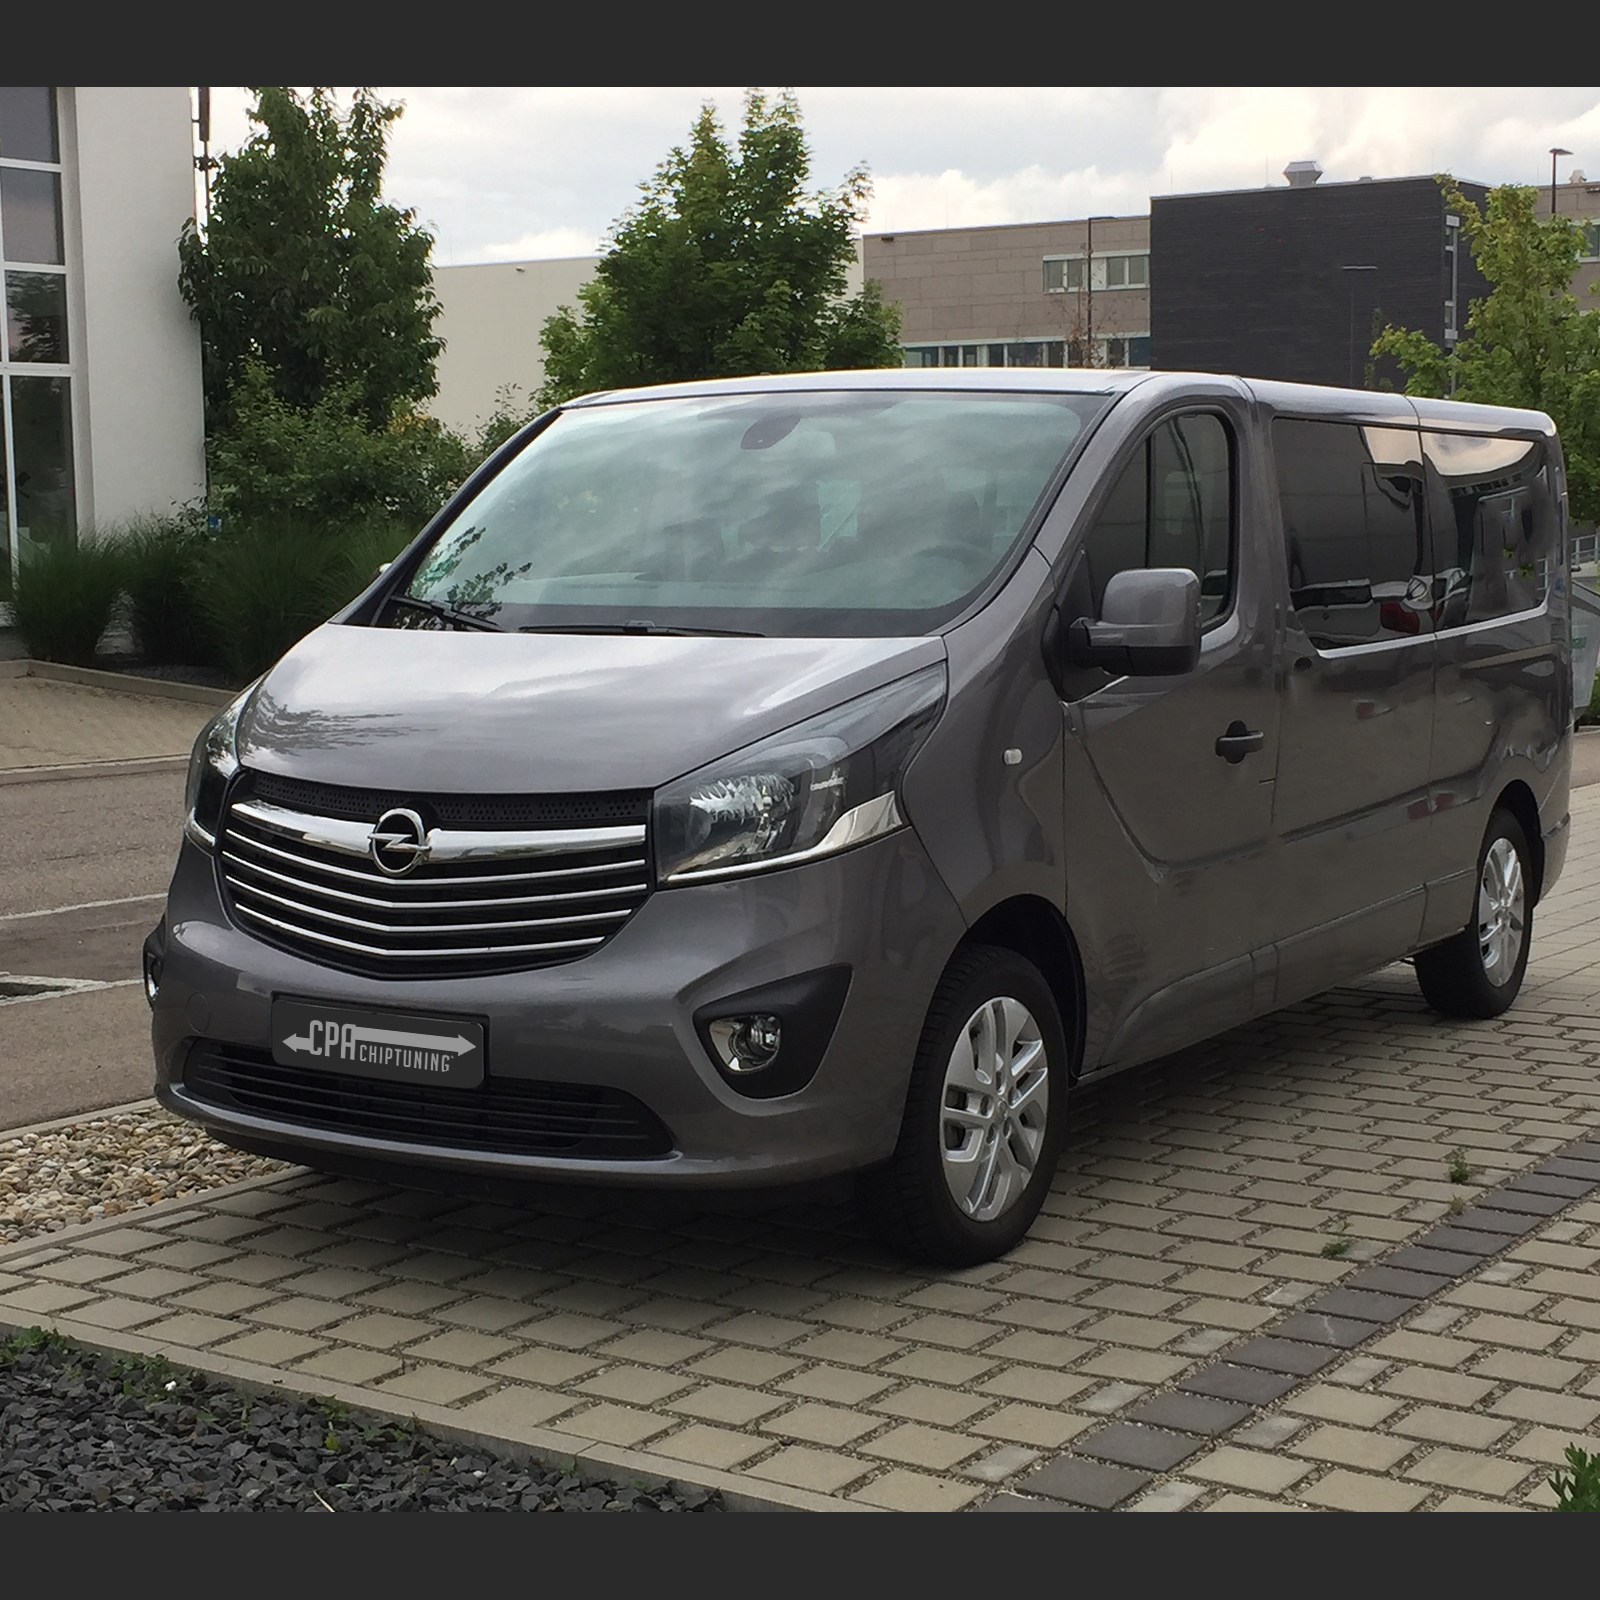 More power for the commercial vehicle: Tuning Opel Vivaro 1.6